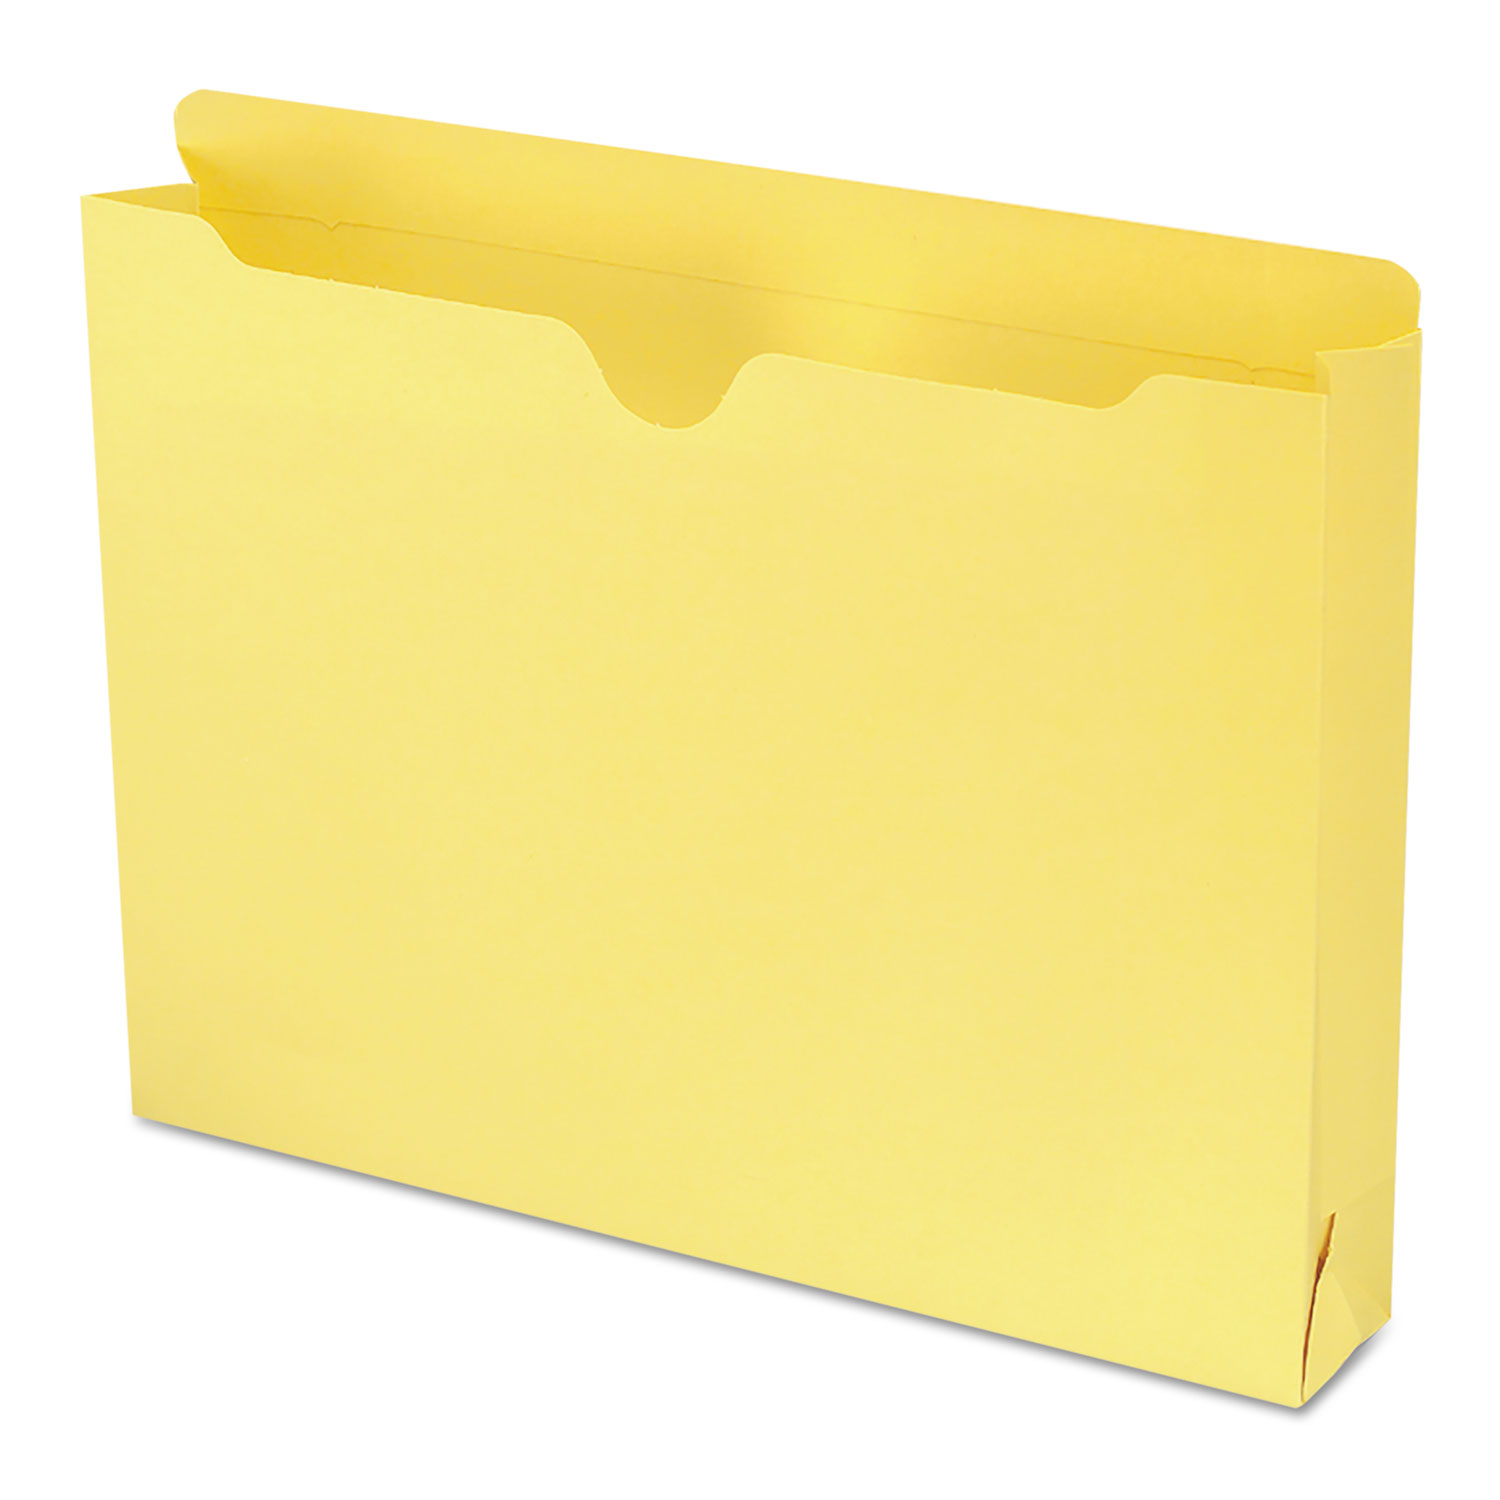  Smead 75571 Colored File Jackets with Reinforced Double-Ply Tab, Straight Tab, Letter Size, Yellow, 50/Box (SMD75571) 